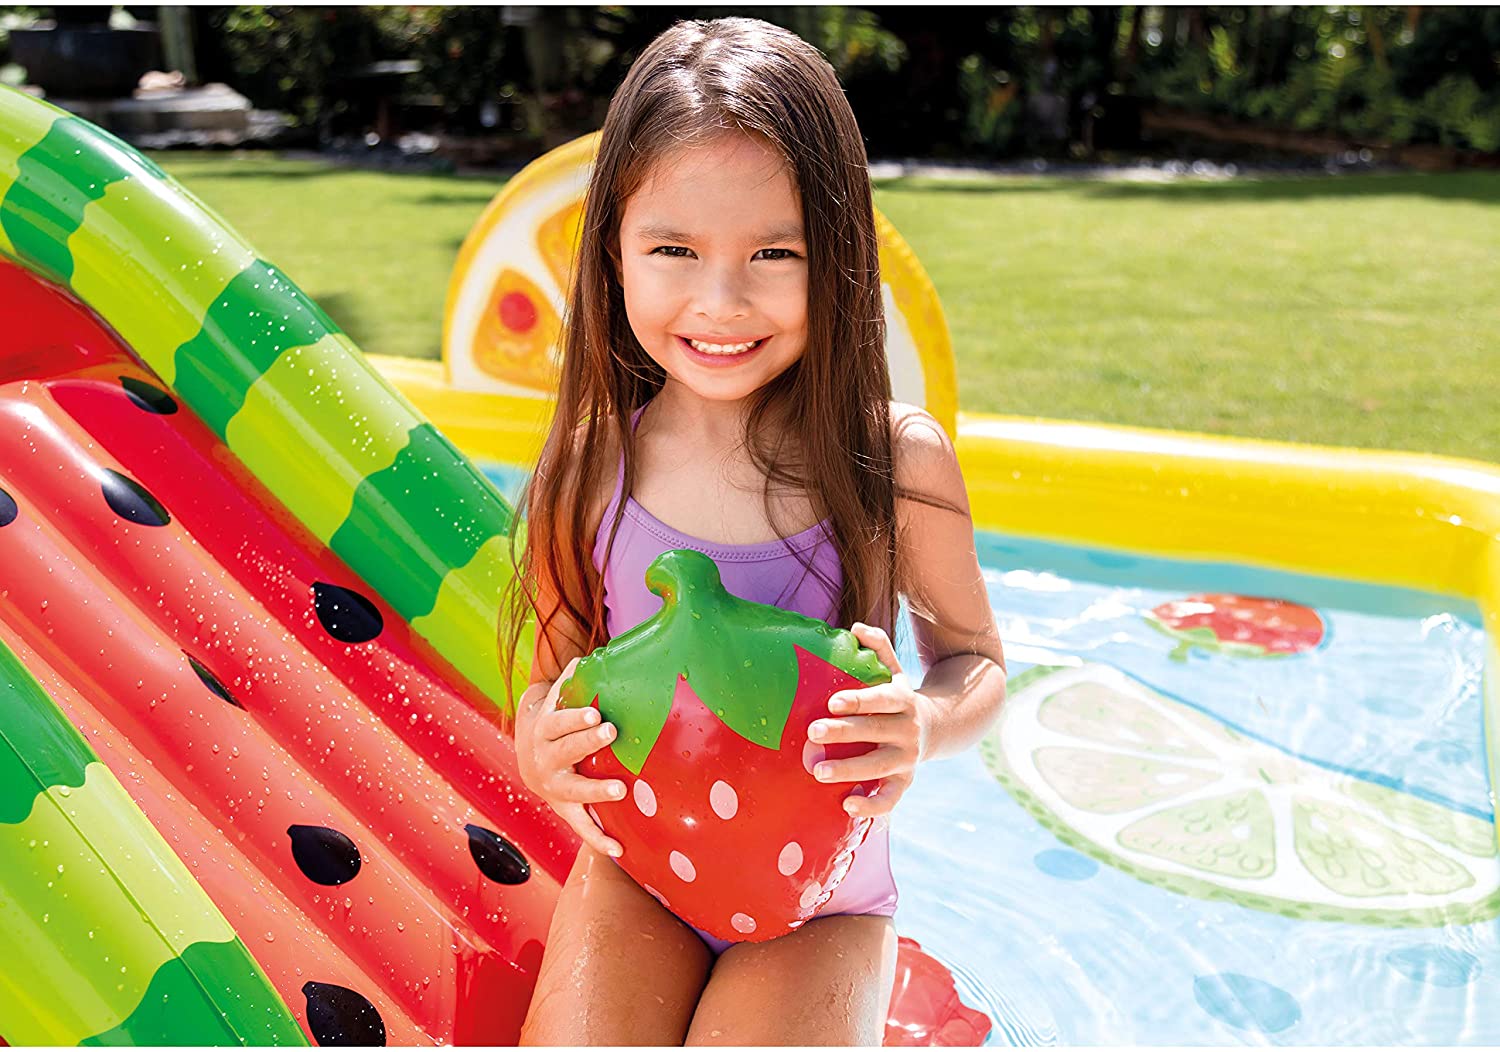 Intex Fun 'n Fruity - Inflatable play center 96X75X36 - One Shop Online Toys in Pakistan